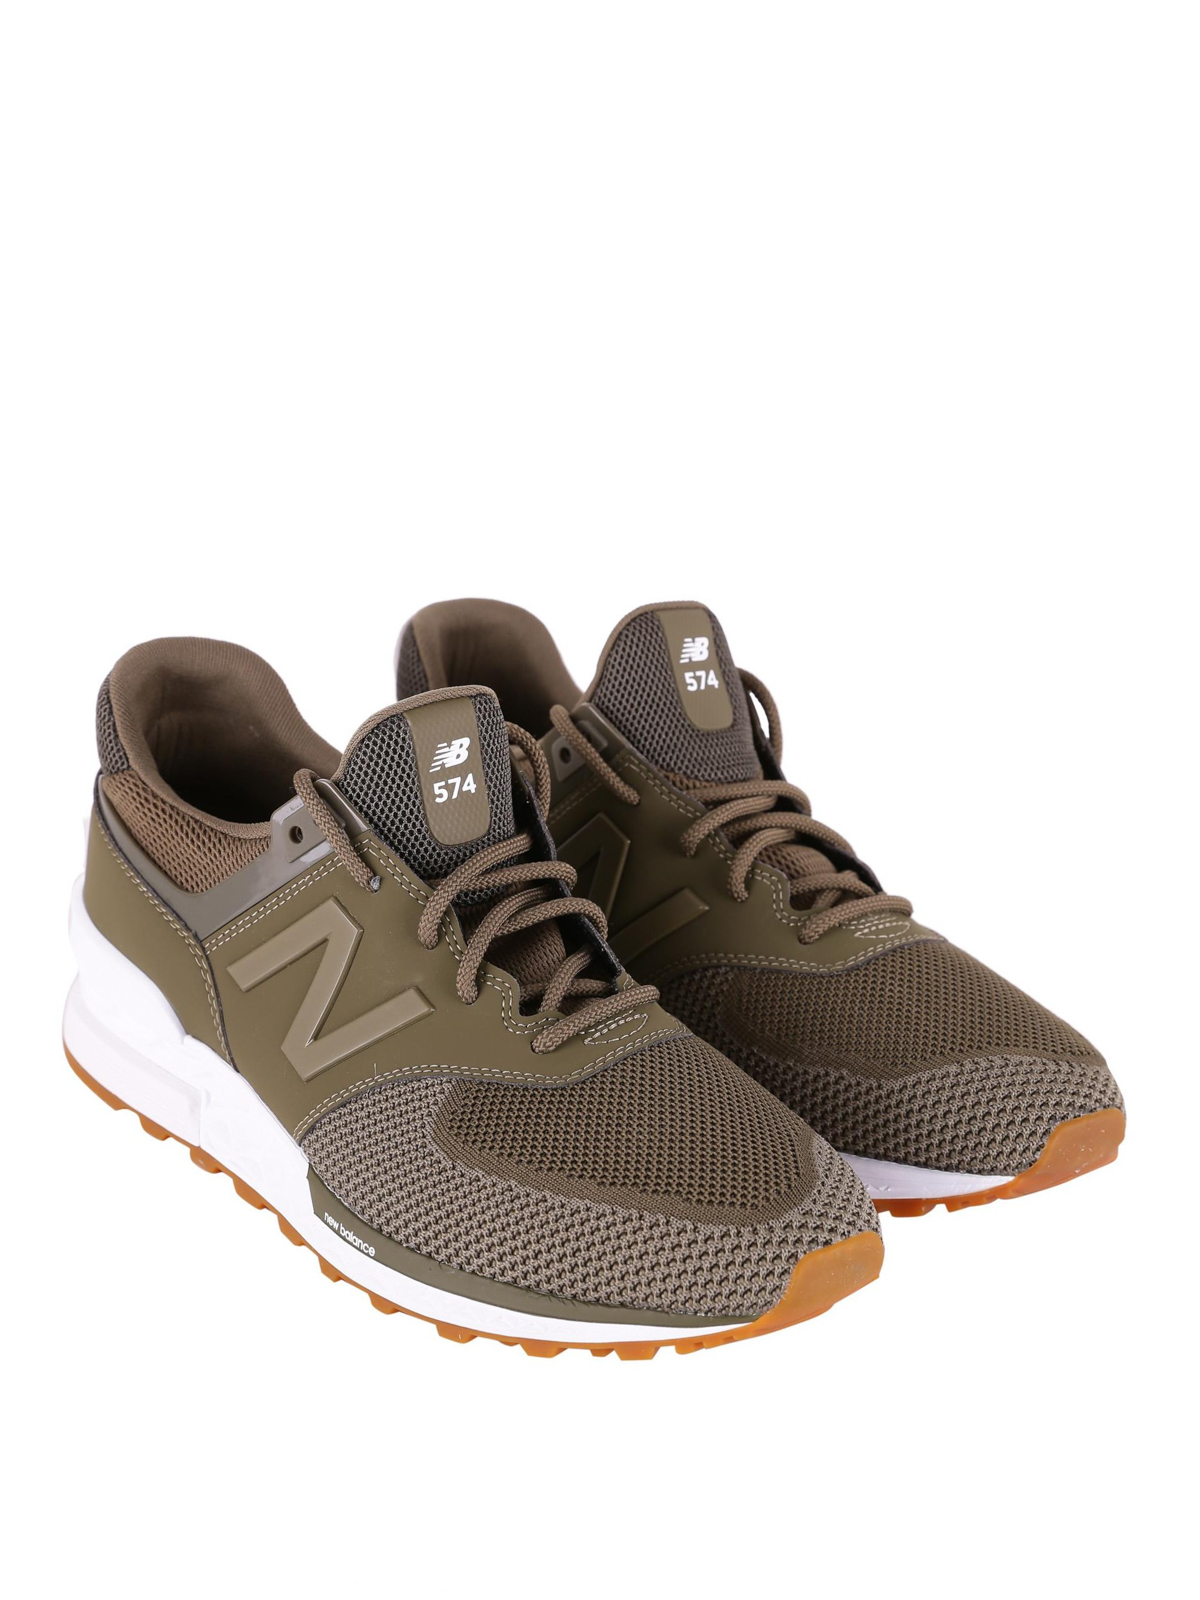 Gastheer van Mooie vrouw Dader Trainers New Balance - 574 Sport army green sneakers - MS574EMO